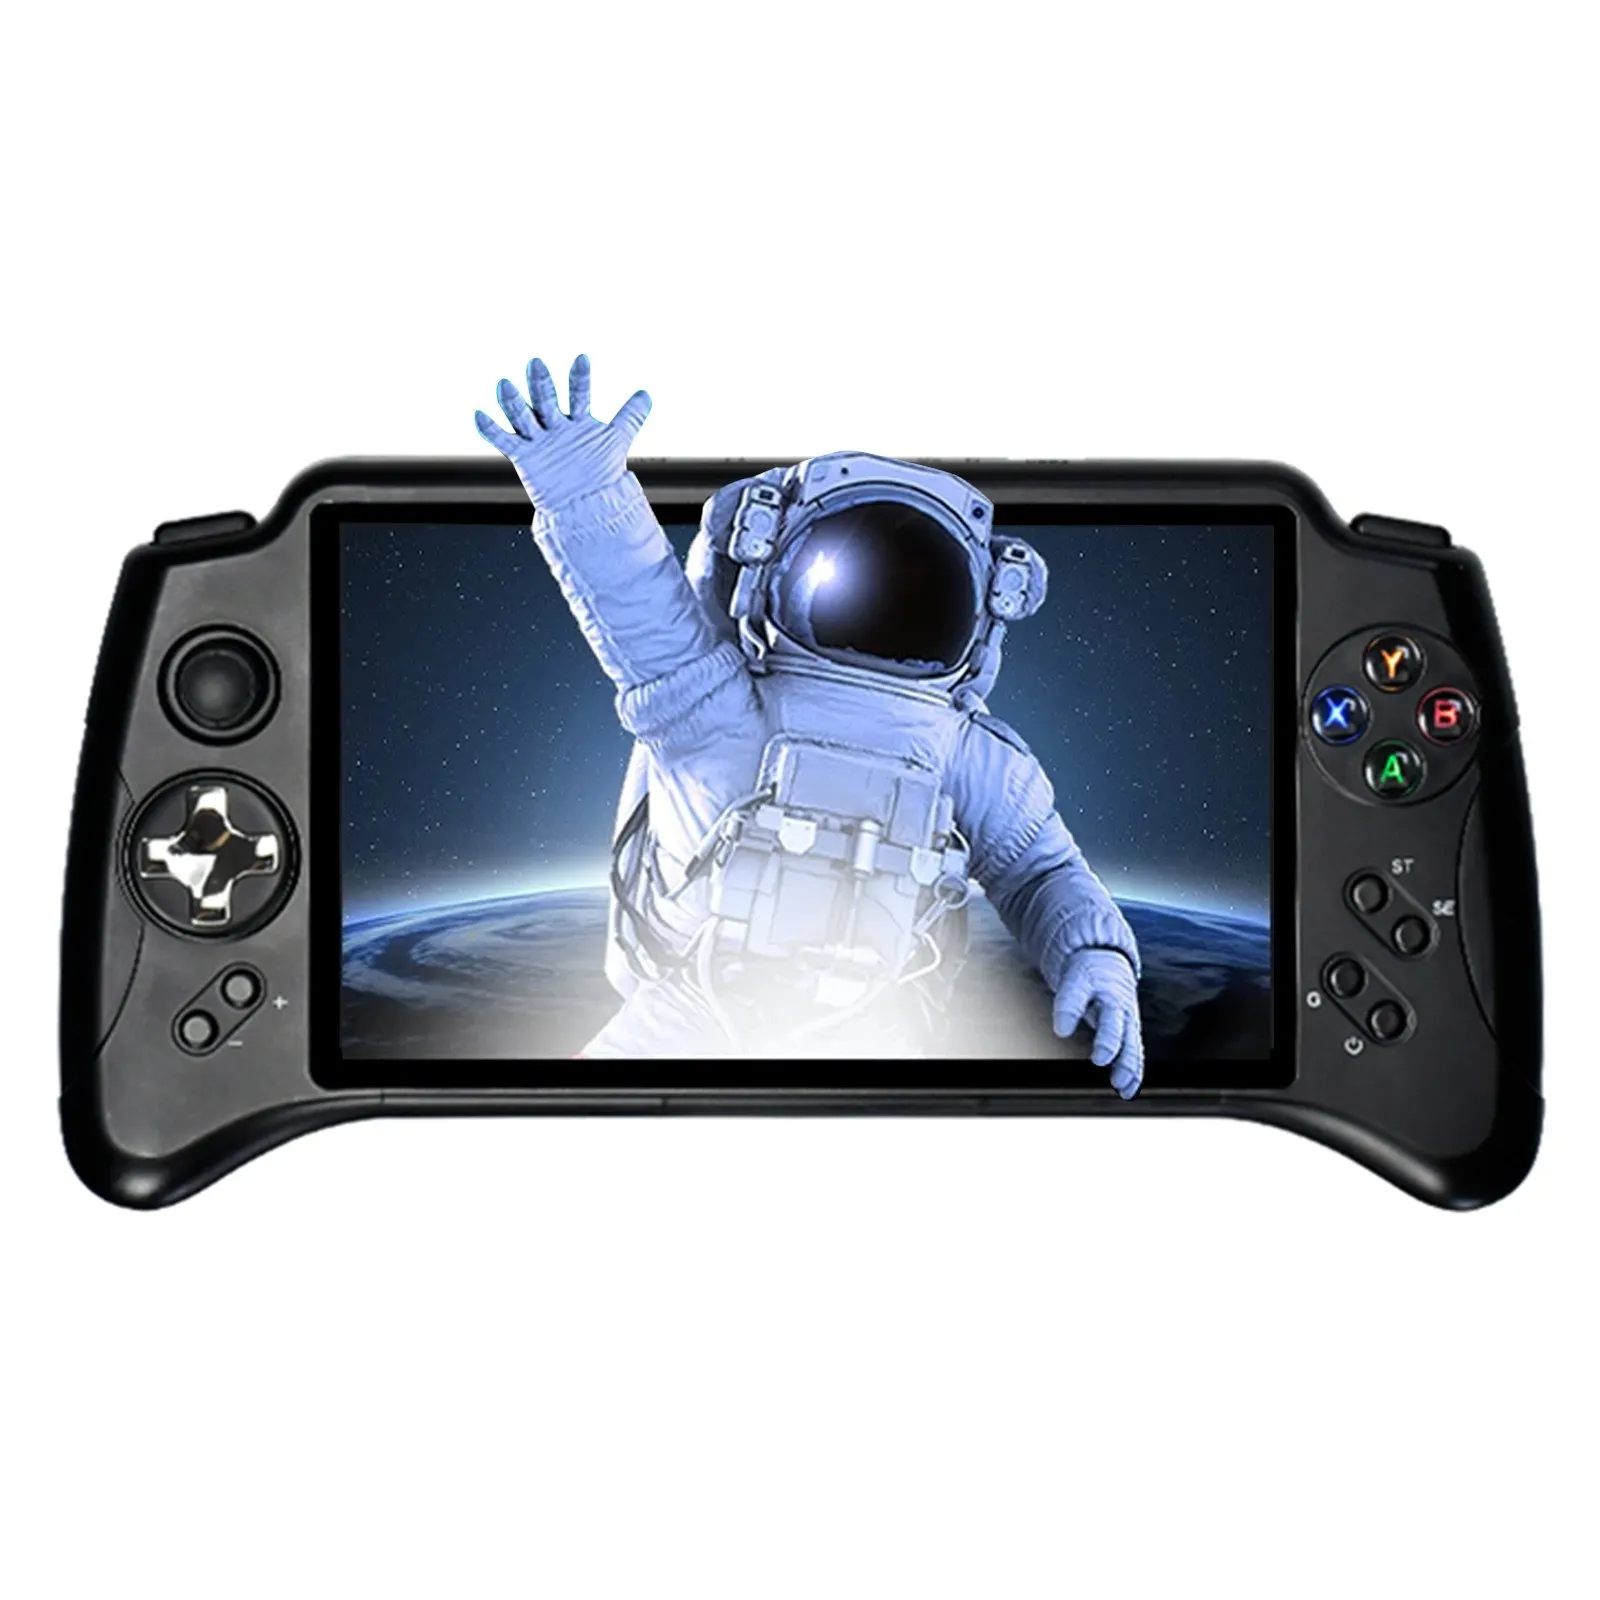 Bomen planten helemaal micro X17 Portable Wifi Game Console 7 Inch Touch Control Screen Display Android  7.0 Handheld Joystick Classic Game Controller Multi-f - Buy Game Controller, Joystick Classic Game Controller,Handheld Joystick Classic Game Controller  Product on